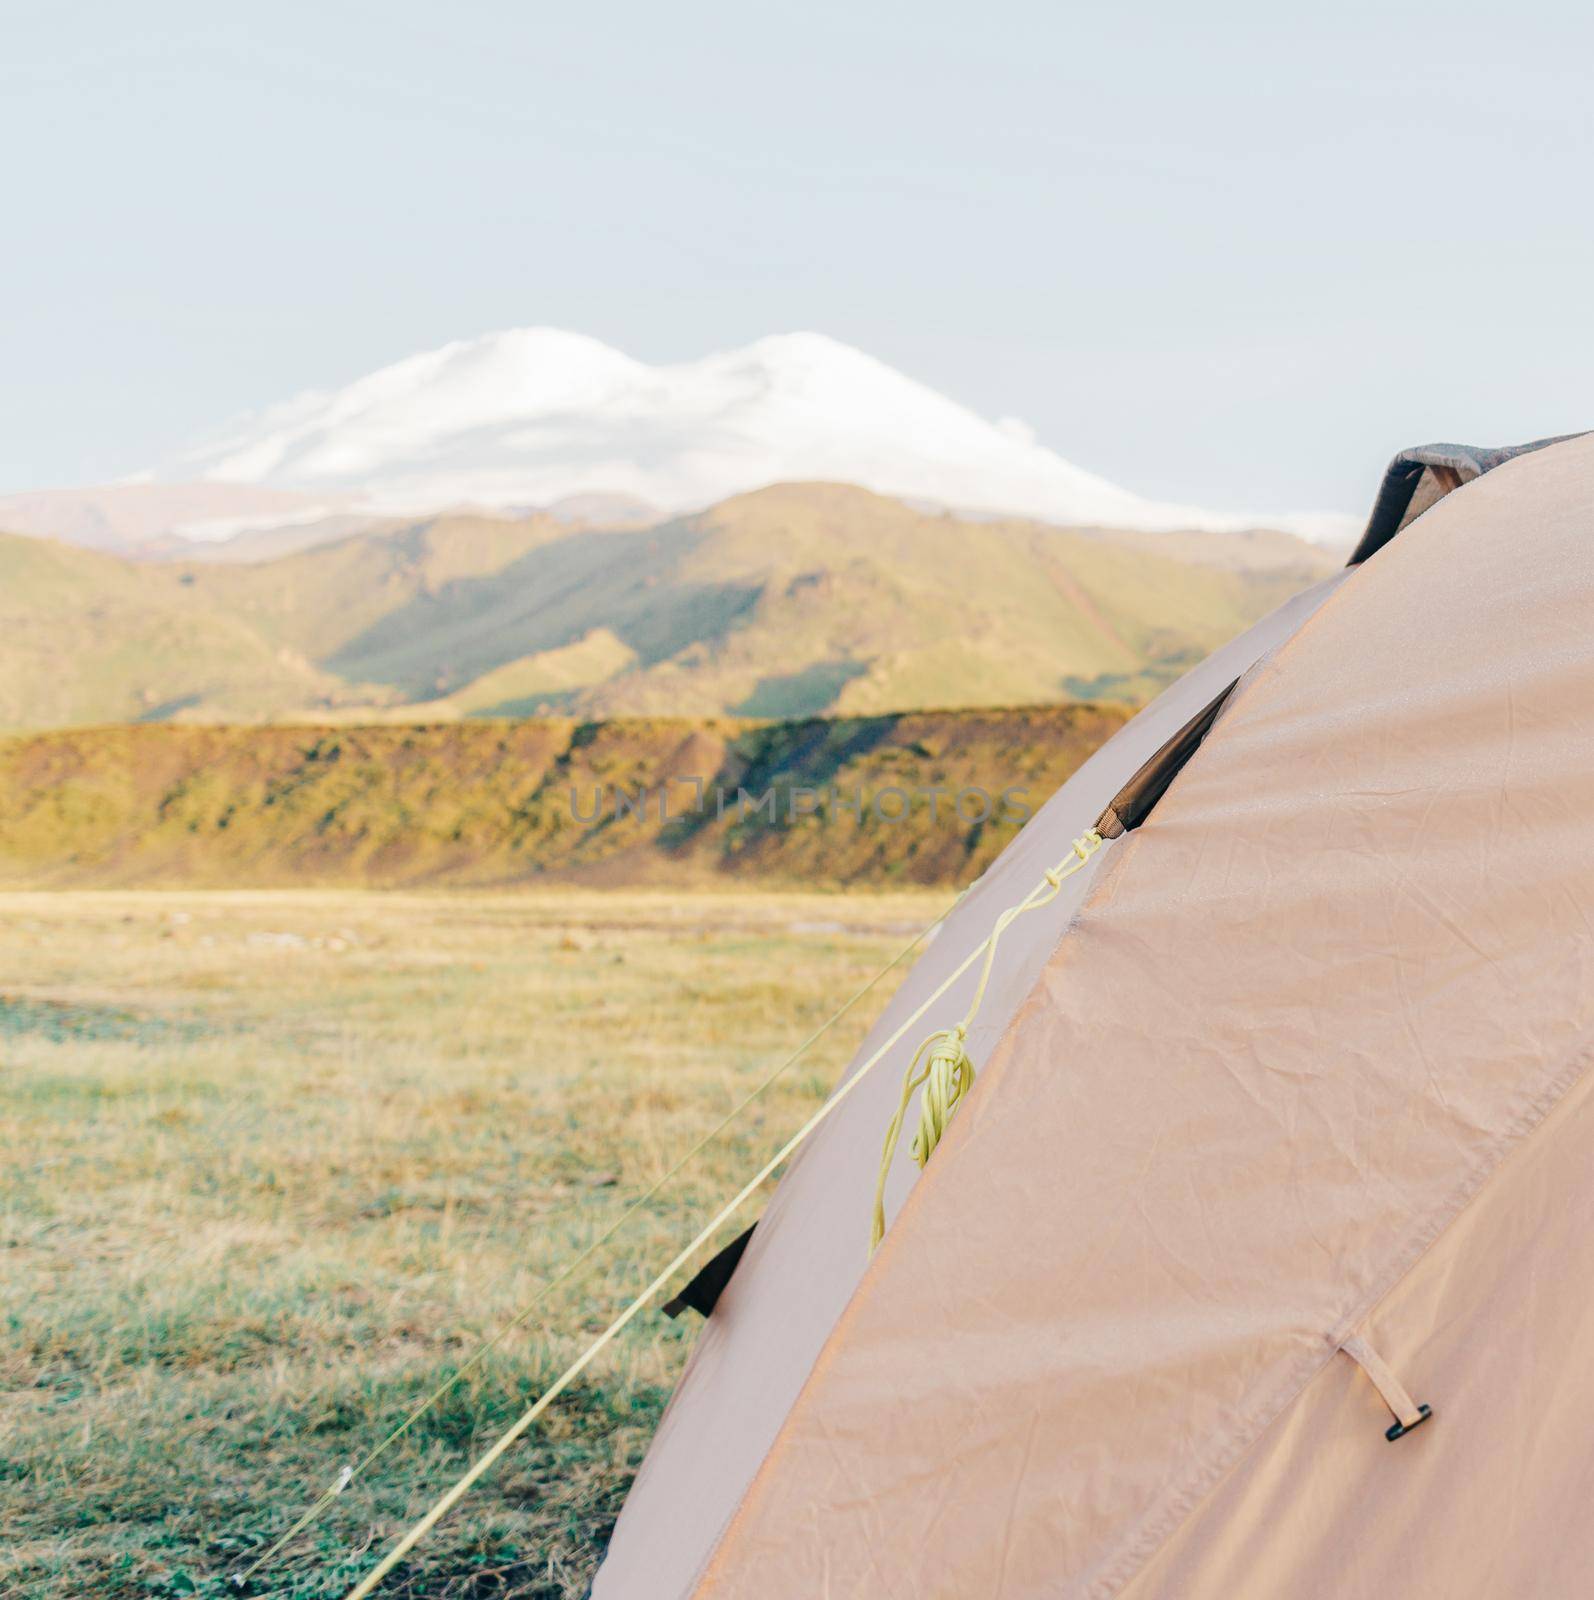 Camping tent on background of Elbrus mountain in summer.